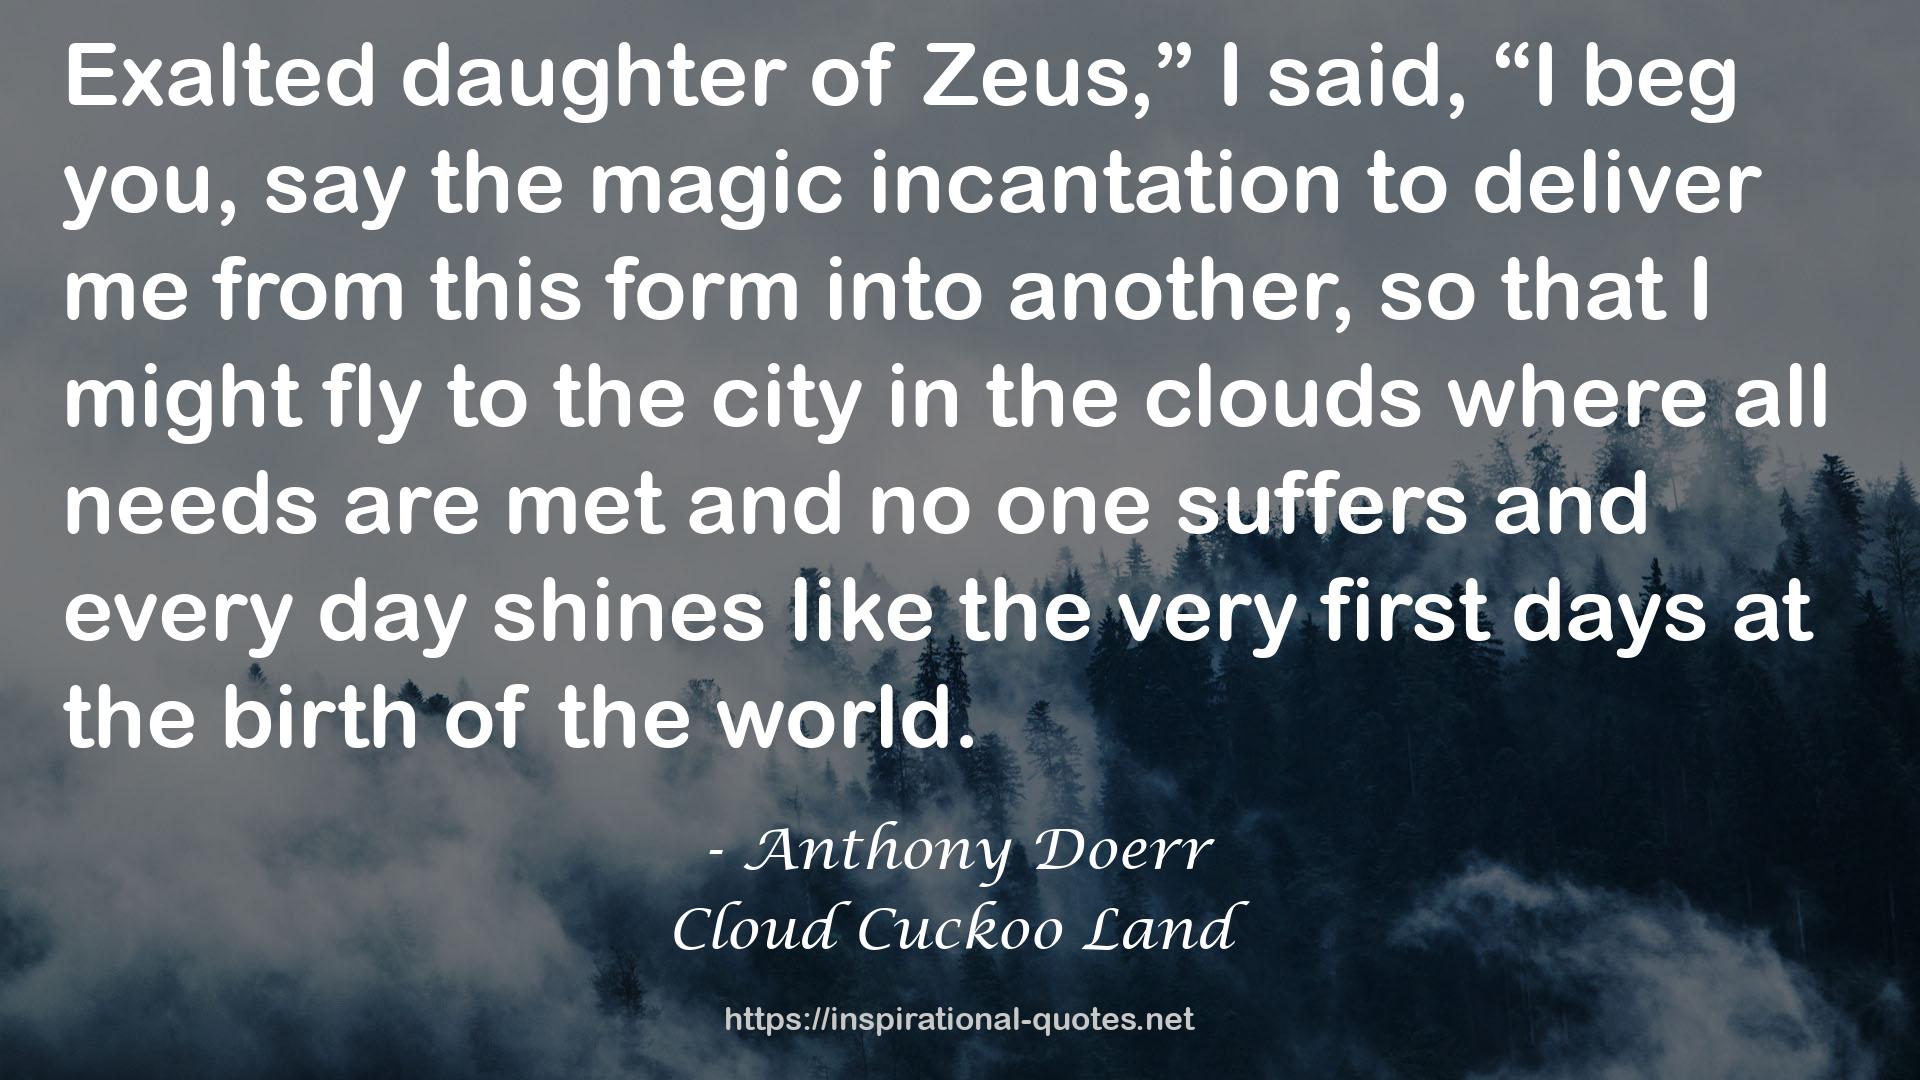 Cloud Cuckoo Land QUOTES